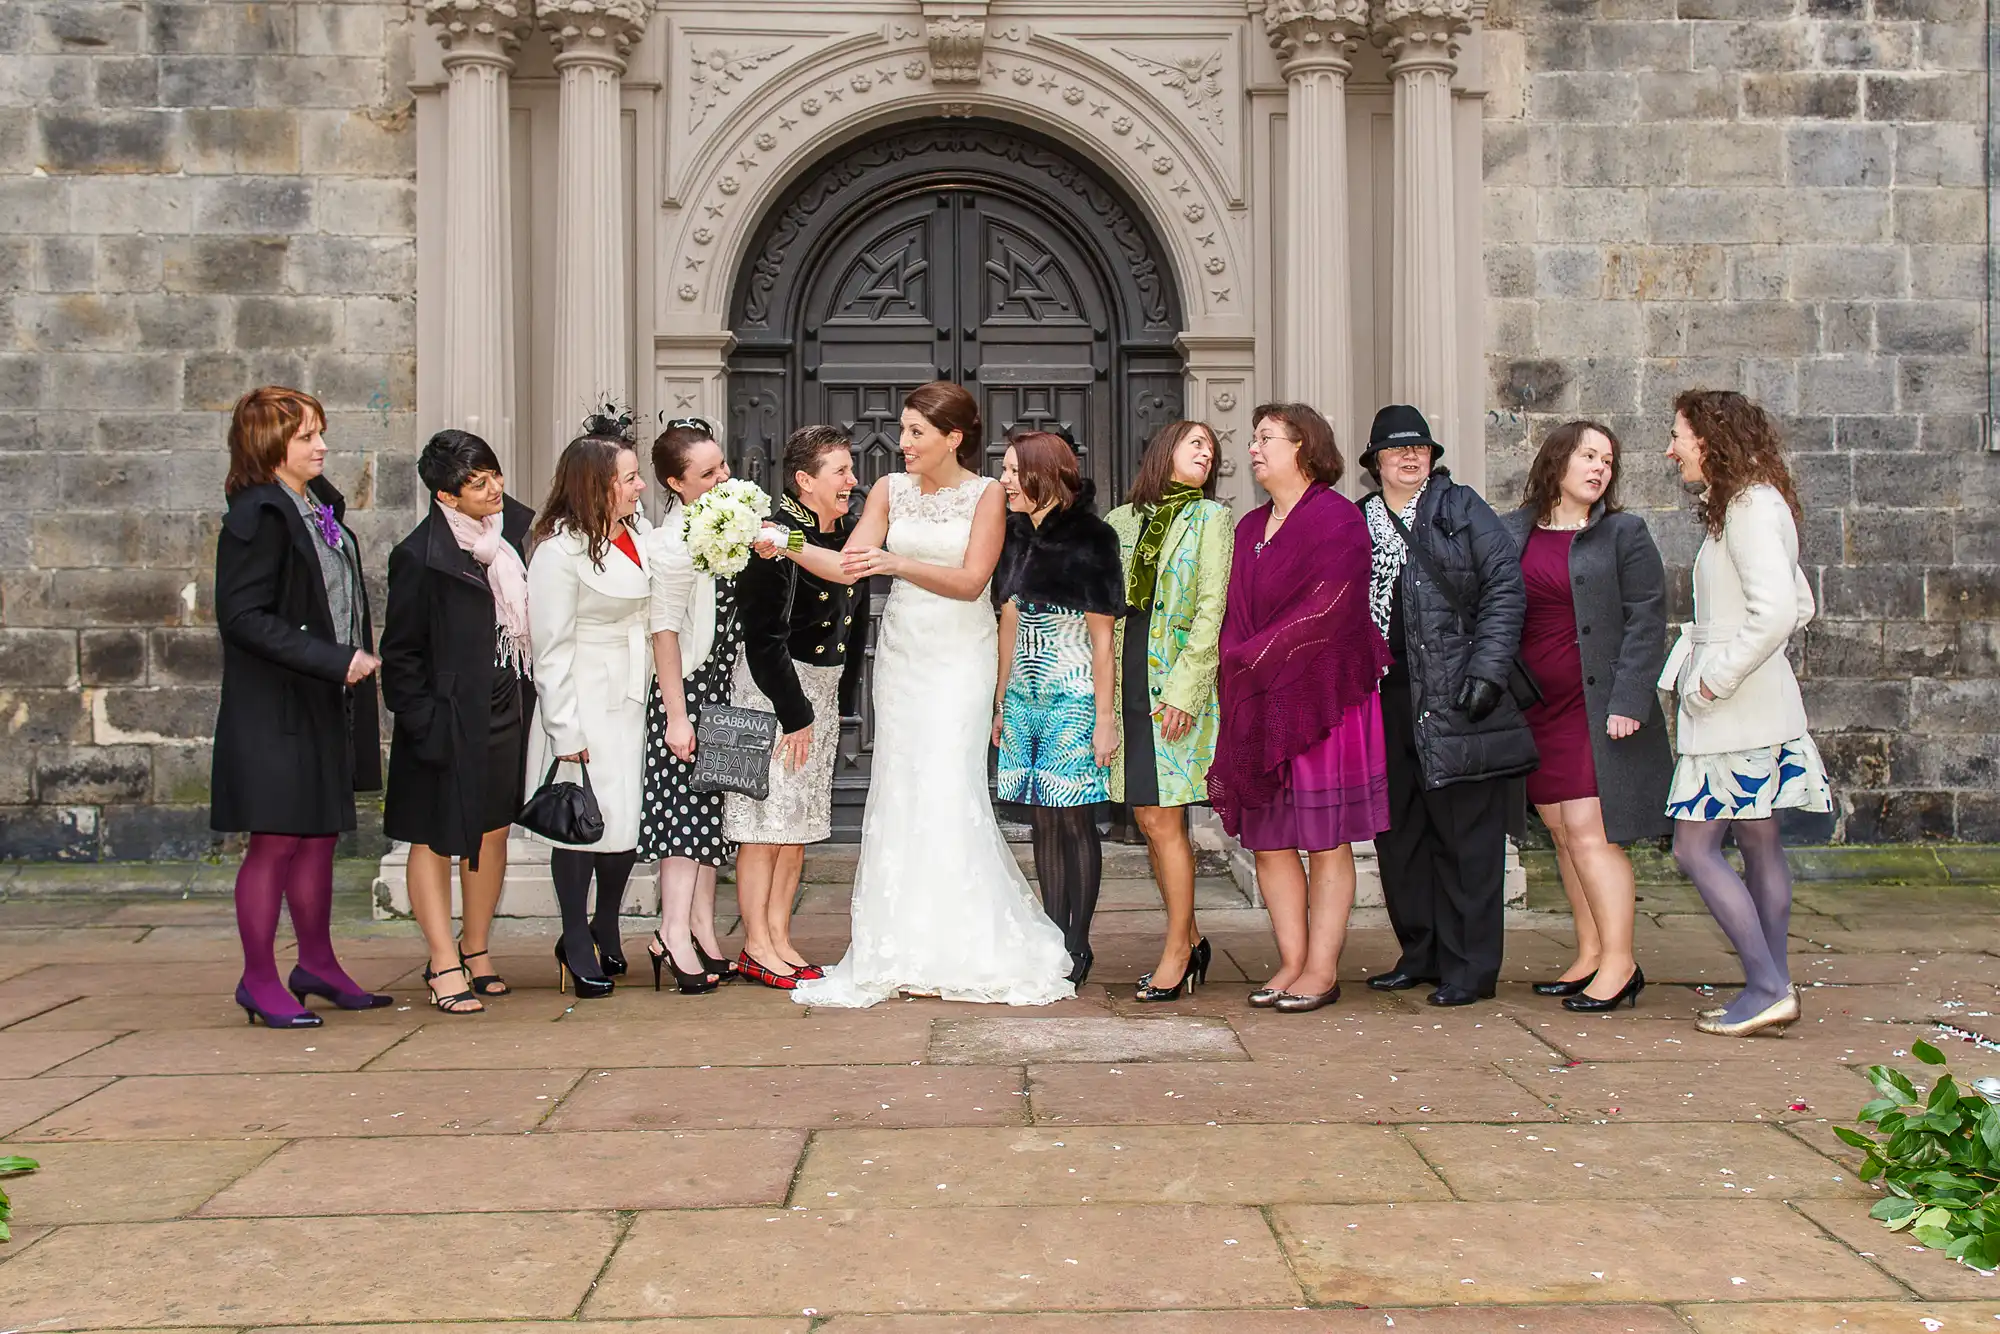 A group of women in various colorful outfits gathers outside a church, interacting cheerfully with a bride who is holding a bouquet.